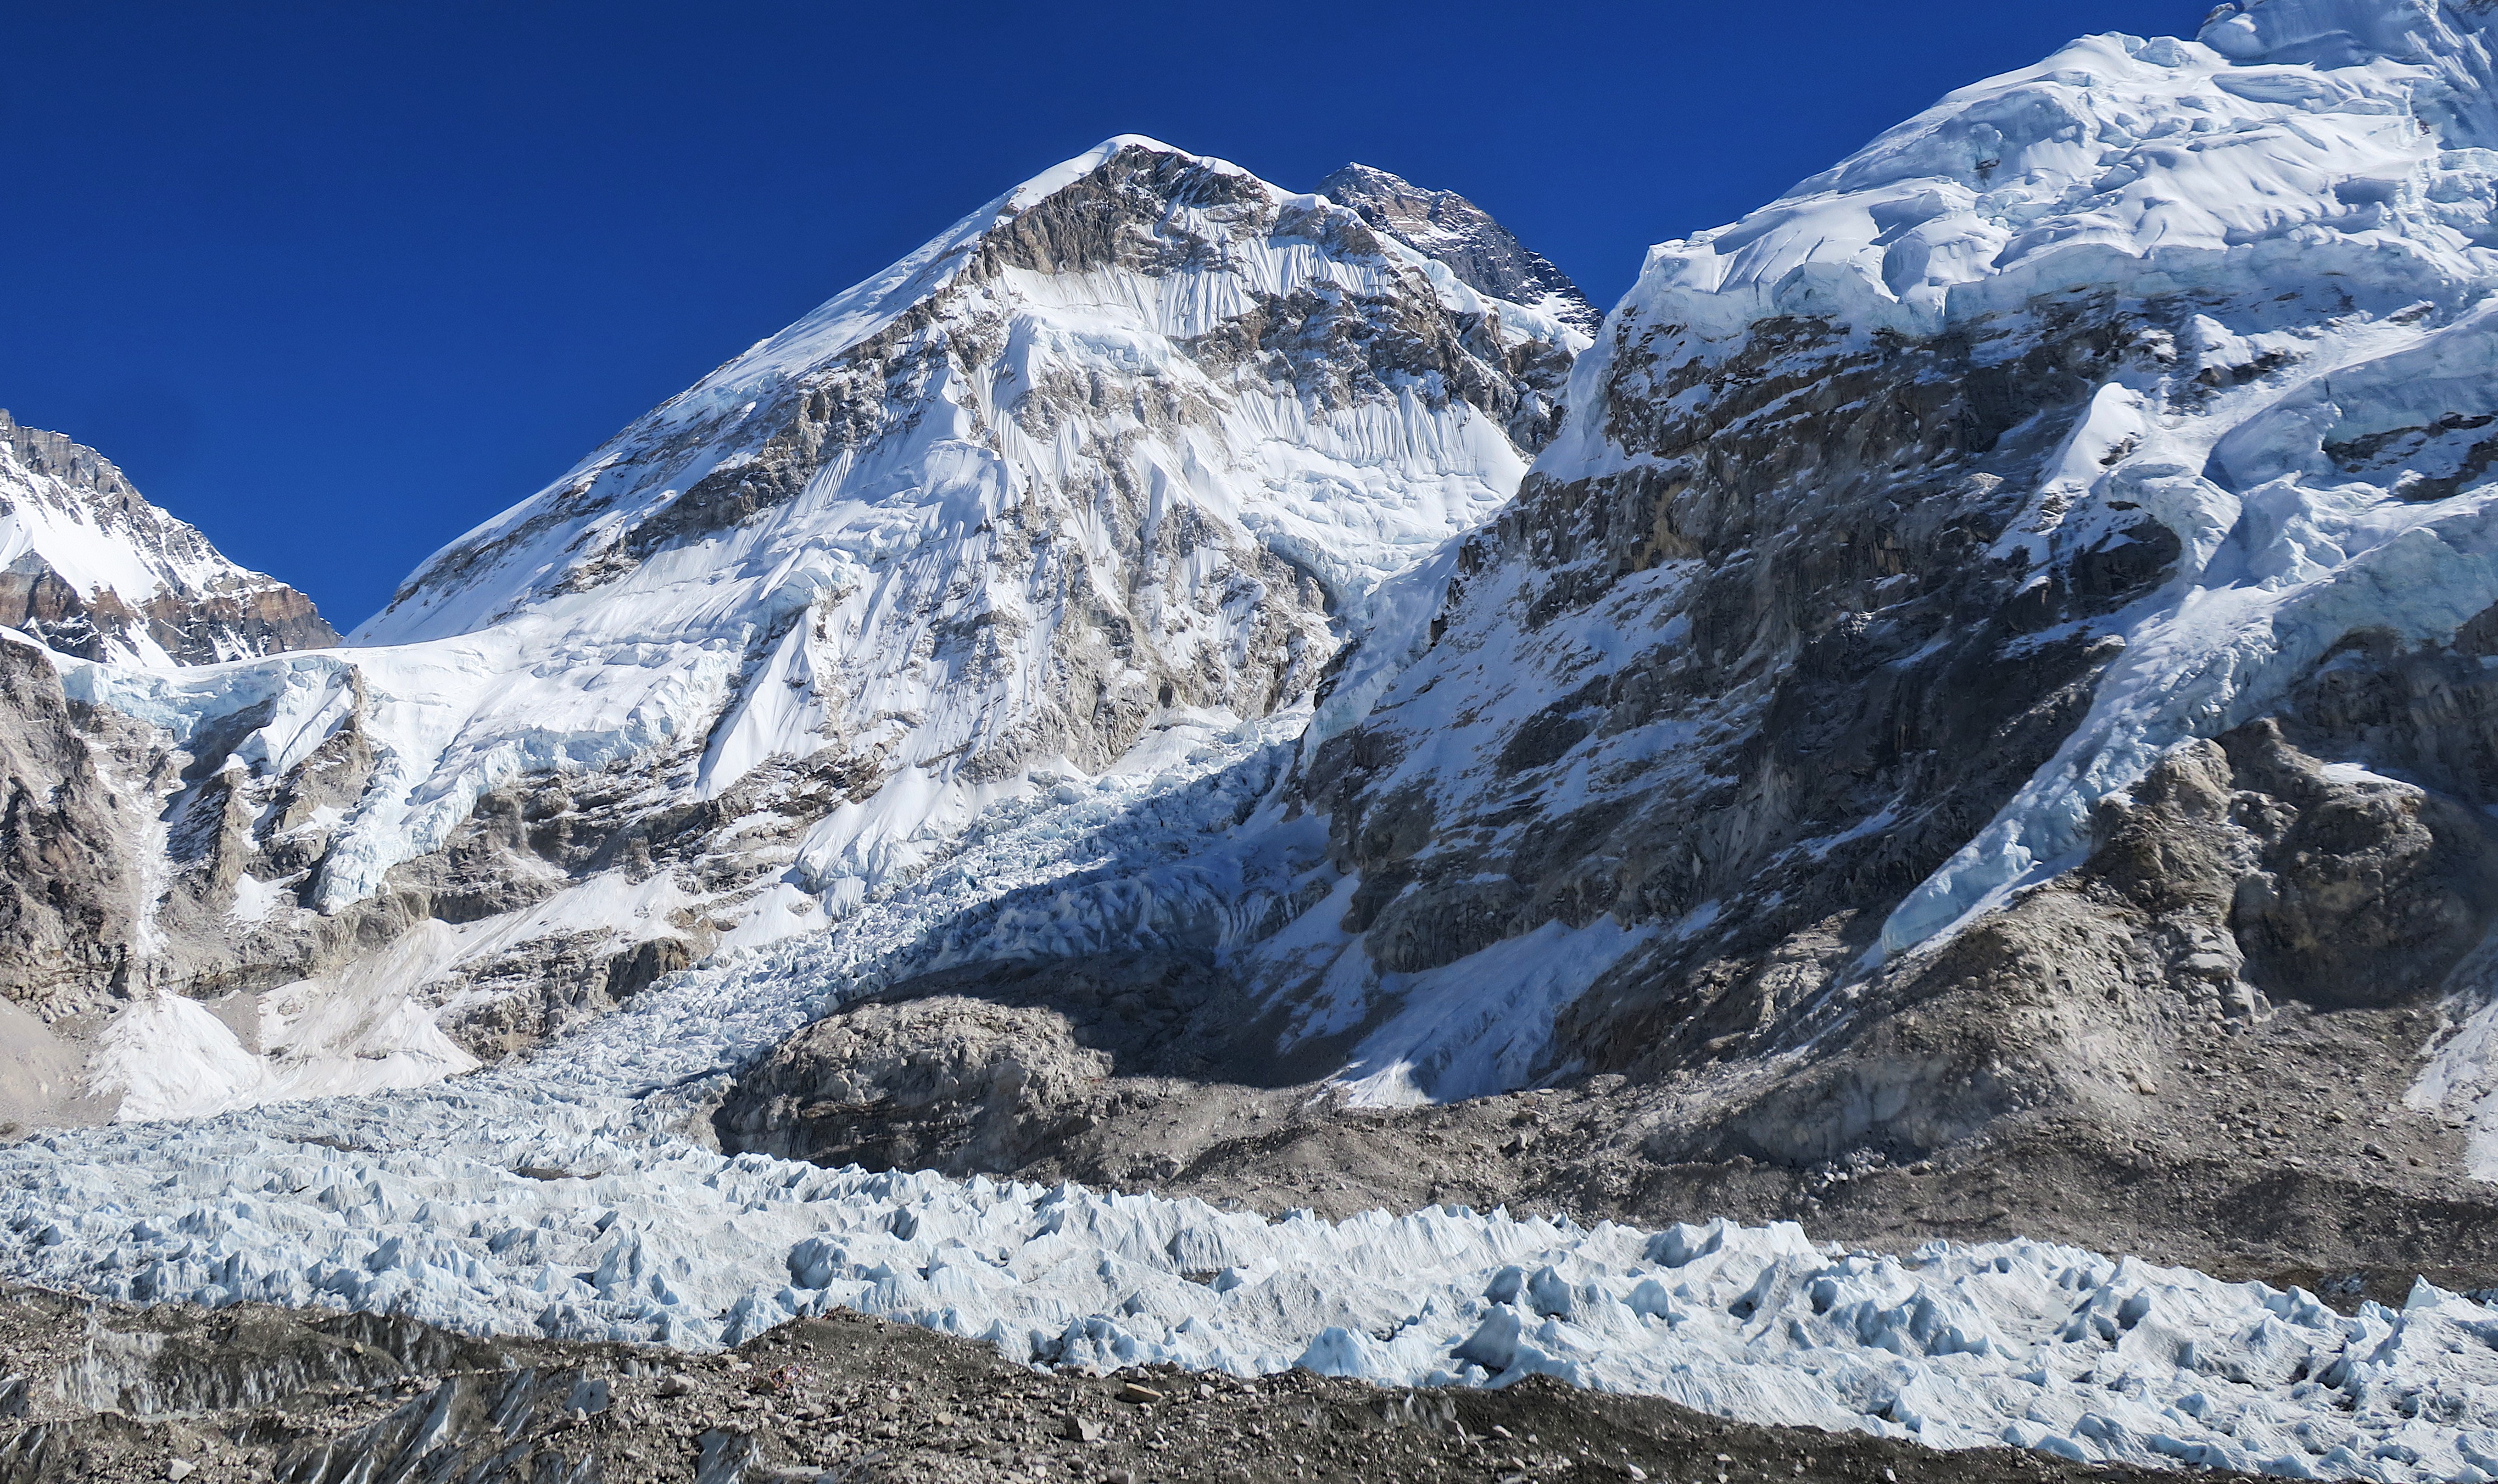 The Khumbu Ice Fall is the most dangerous part of climbing Everest. It is best to enjoy it from a safe distance.